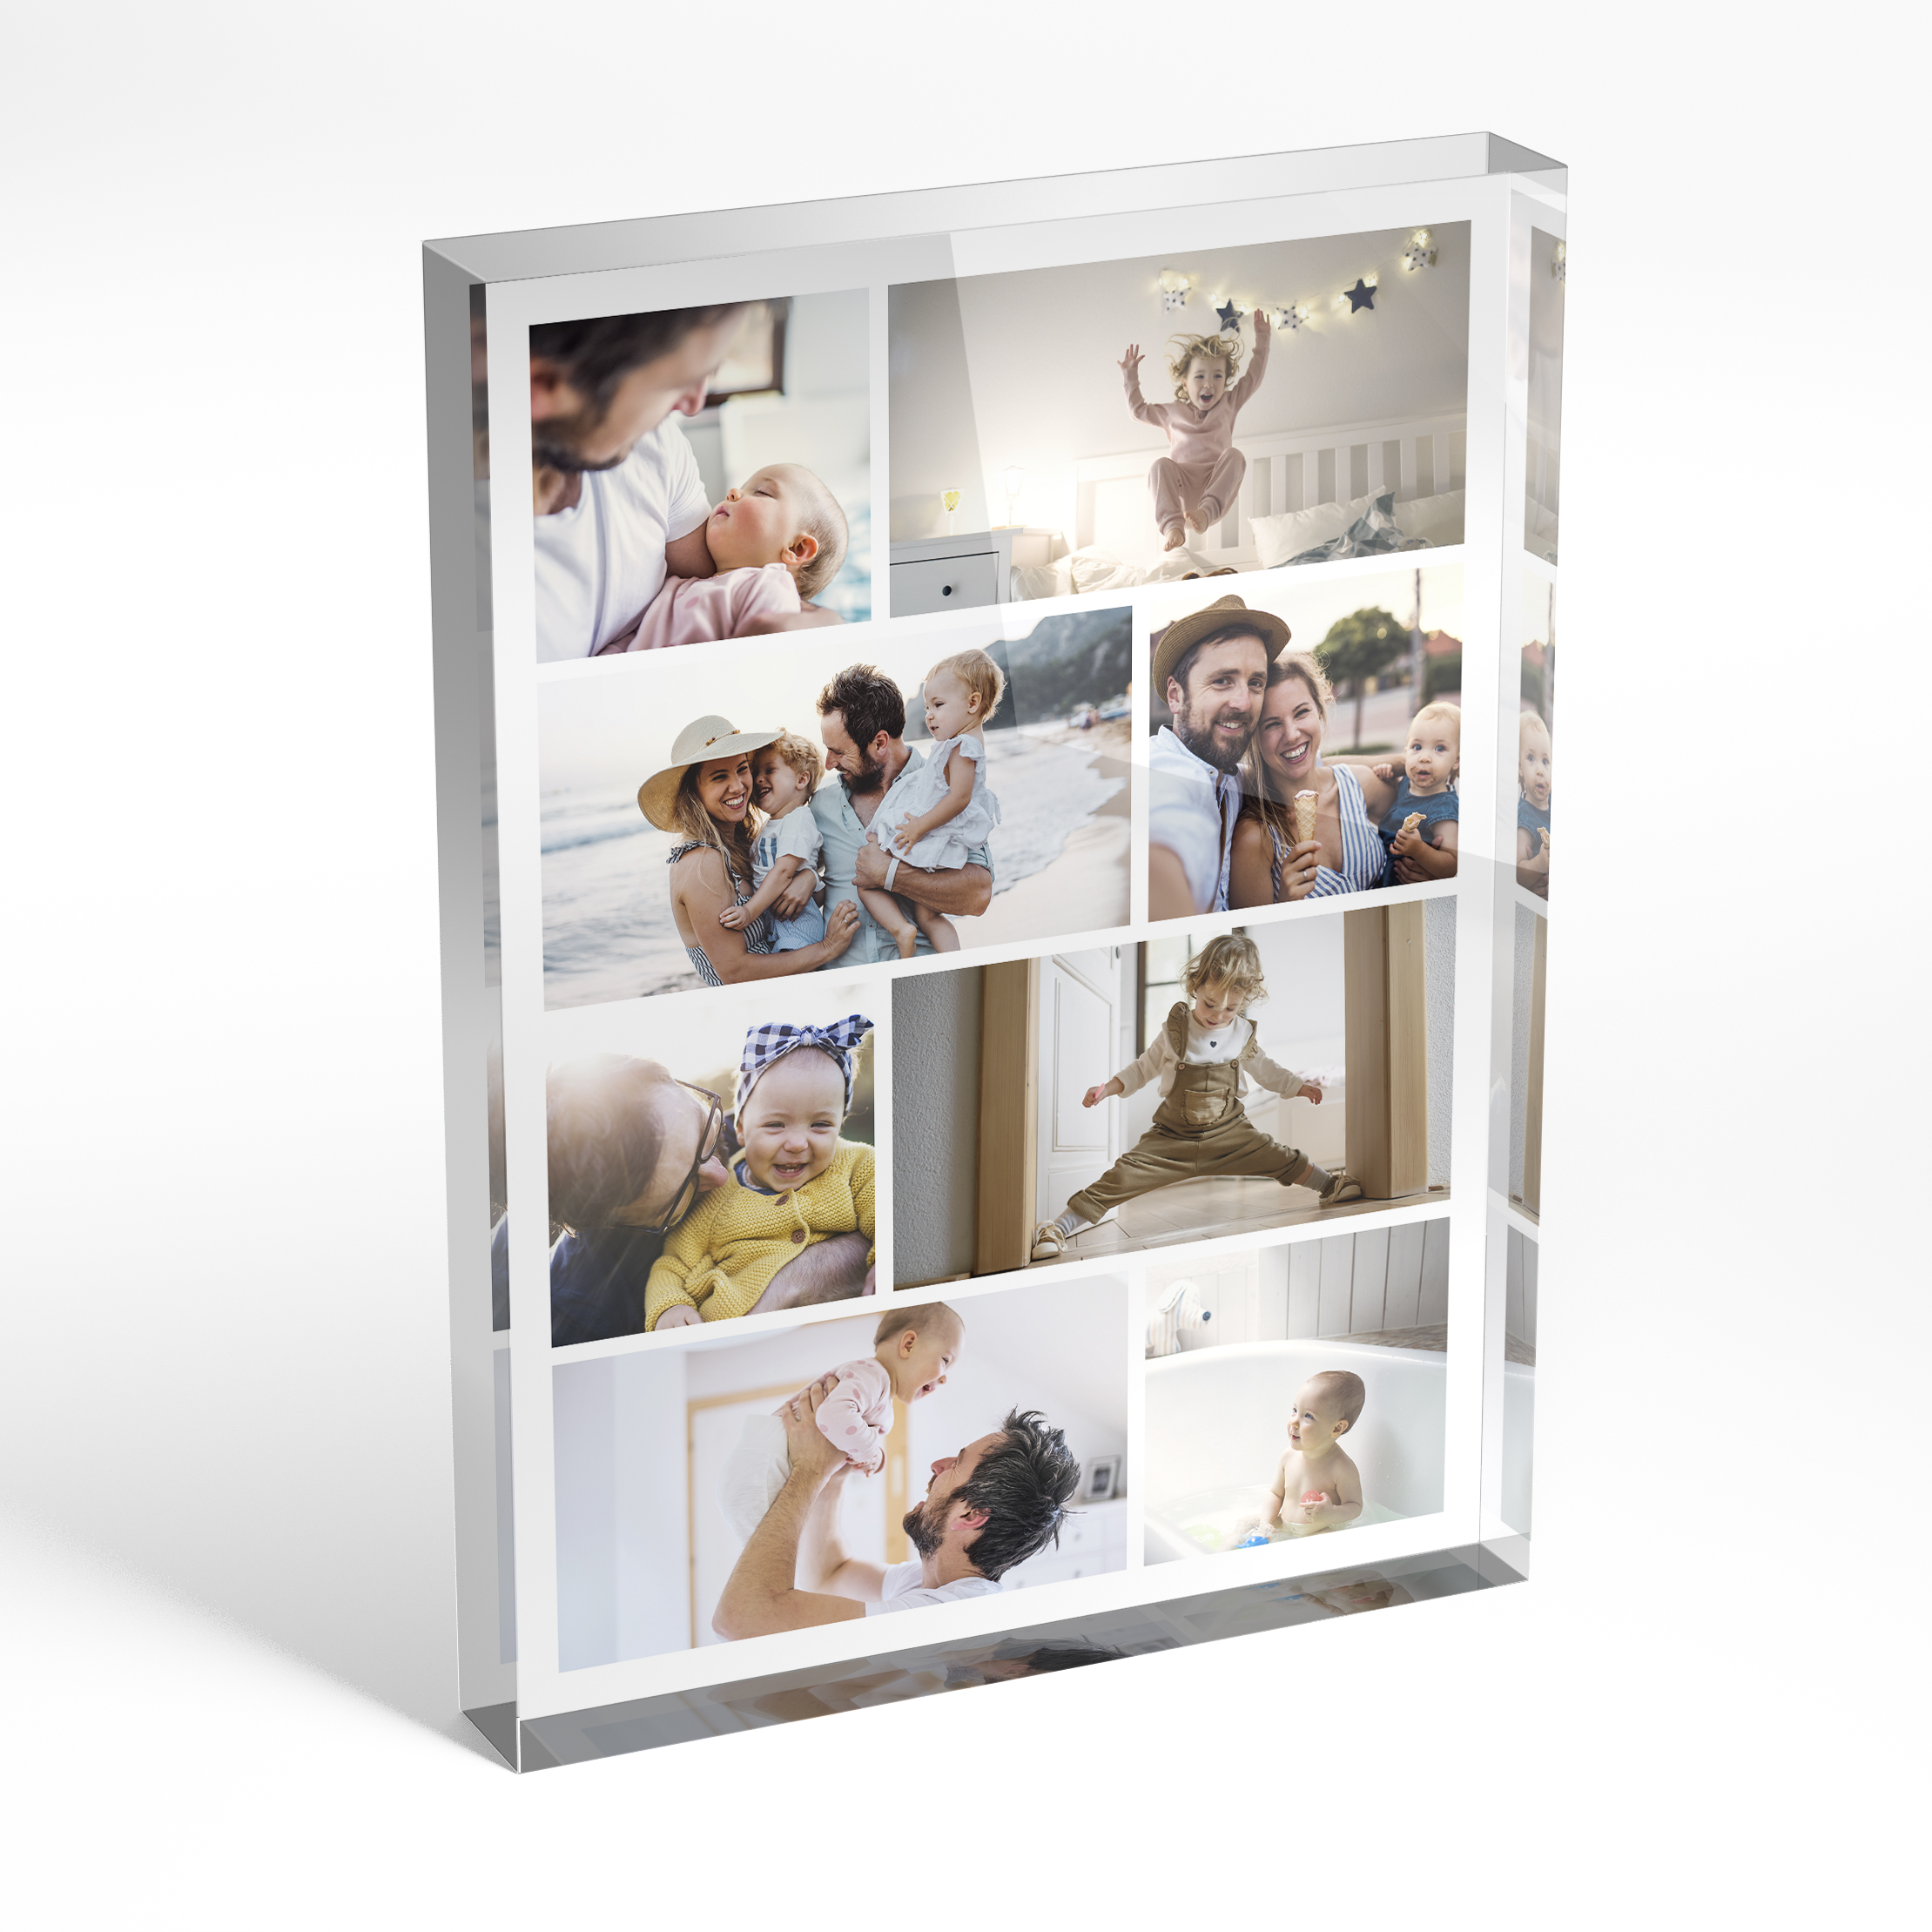 A front side view of a portrait layout Acrylic Photo Block with space for 8 photos. Thiis design is named 'Playful Memories'. 